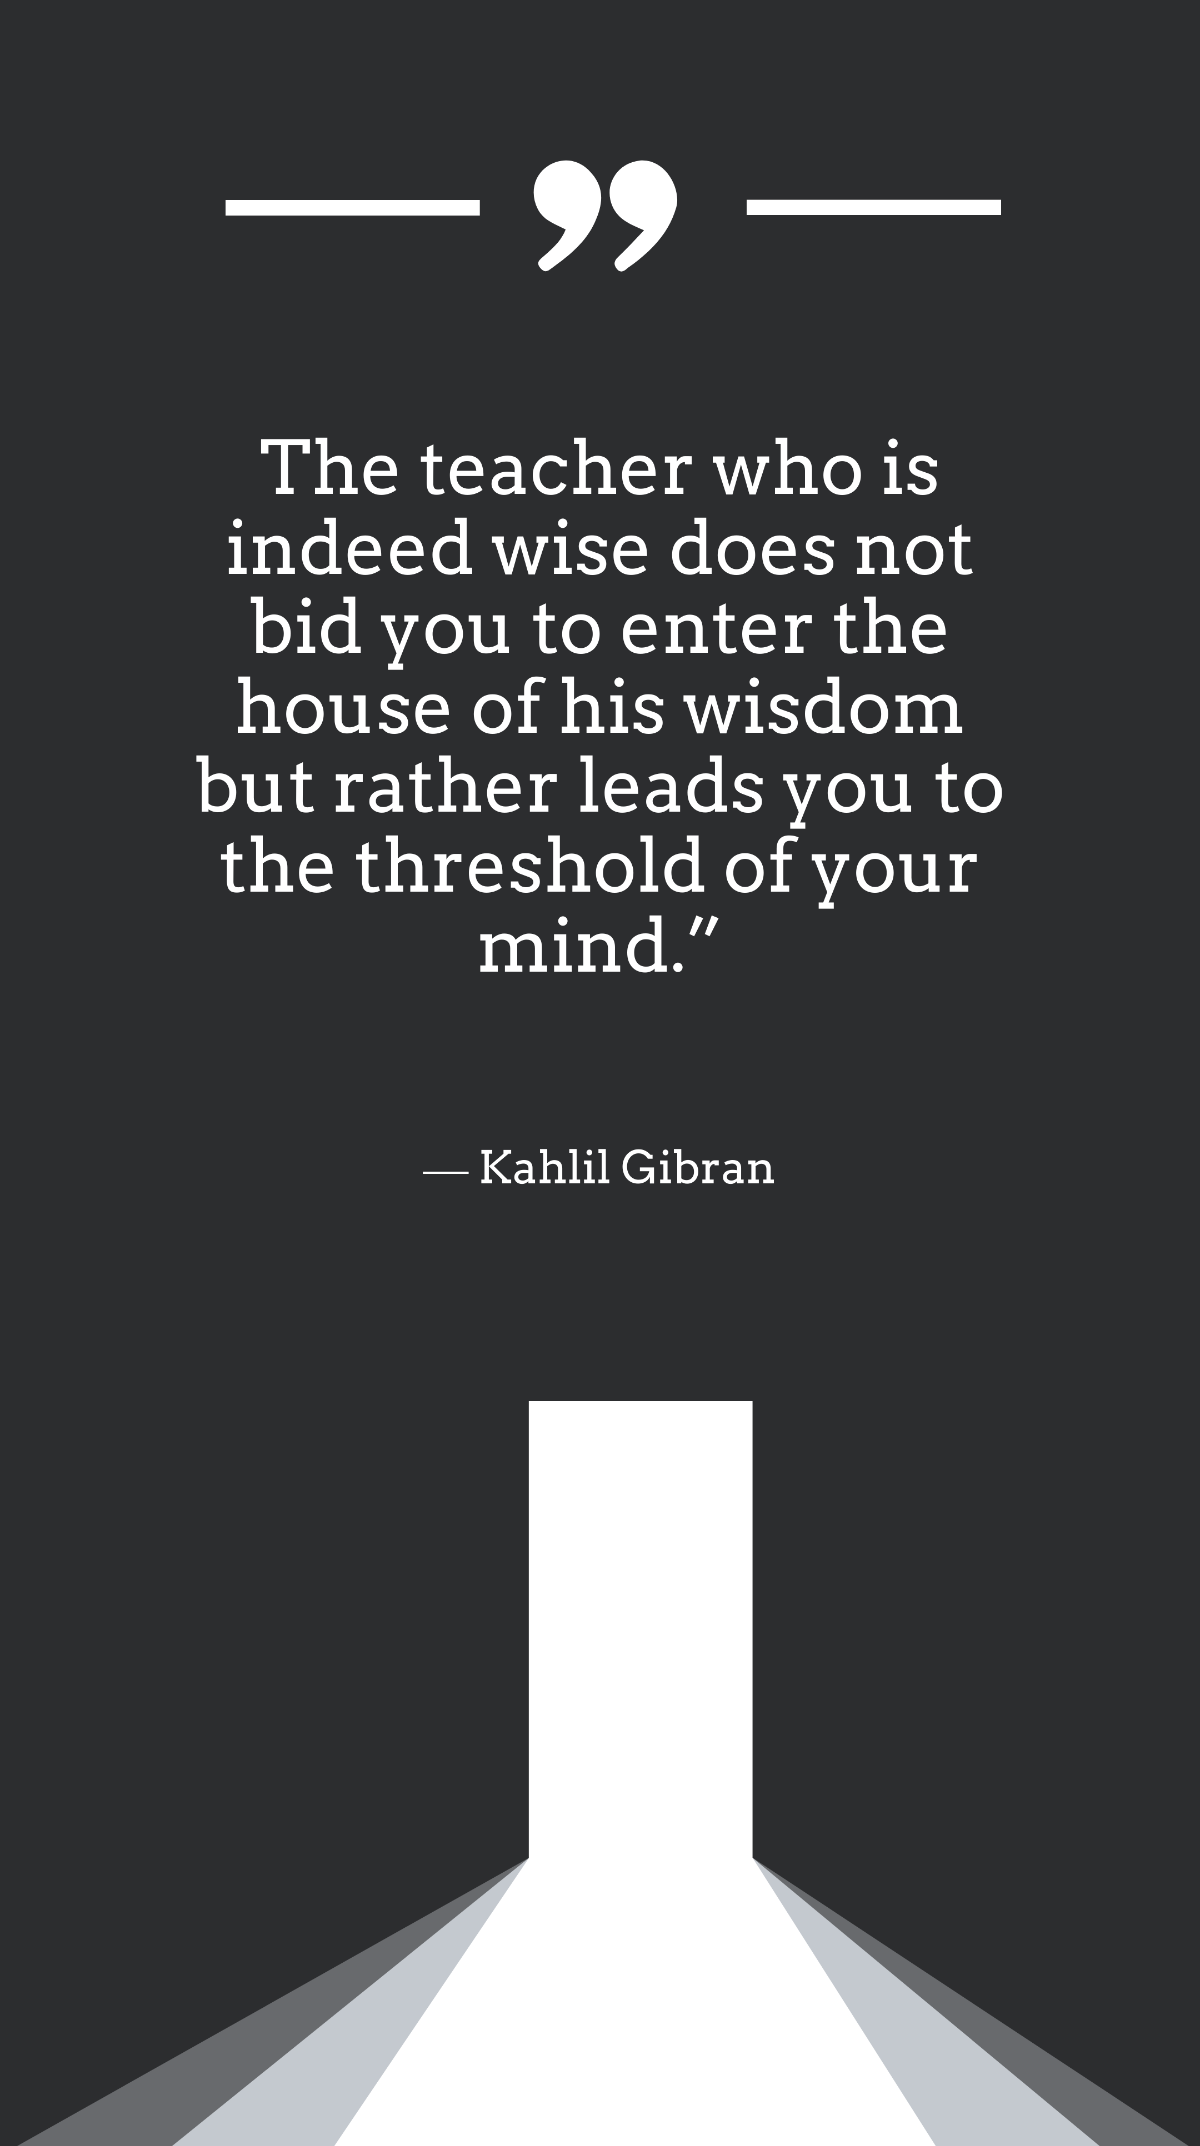 Free Kahlil Gibran - The teacher who is indeed wise does not bid you to enter the house of his wisdom but rather leads you to the threshold of your mind. Template